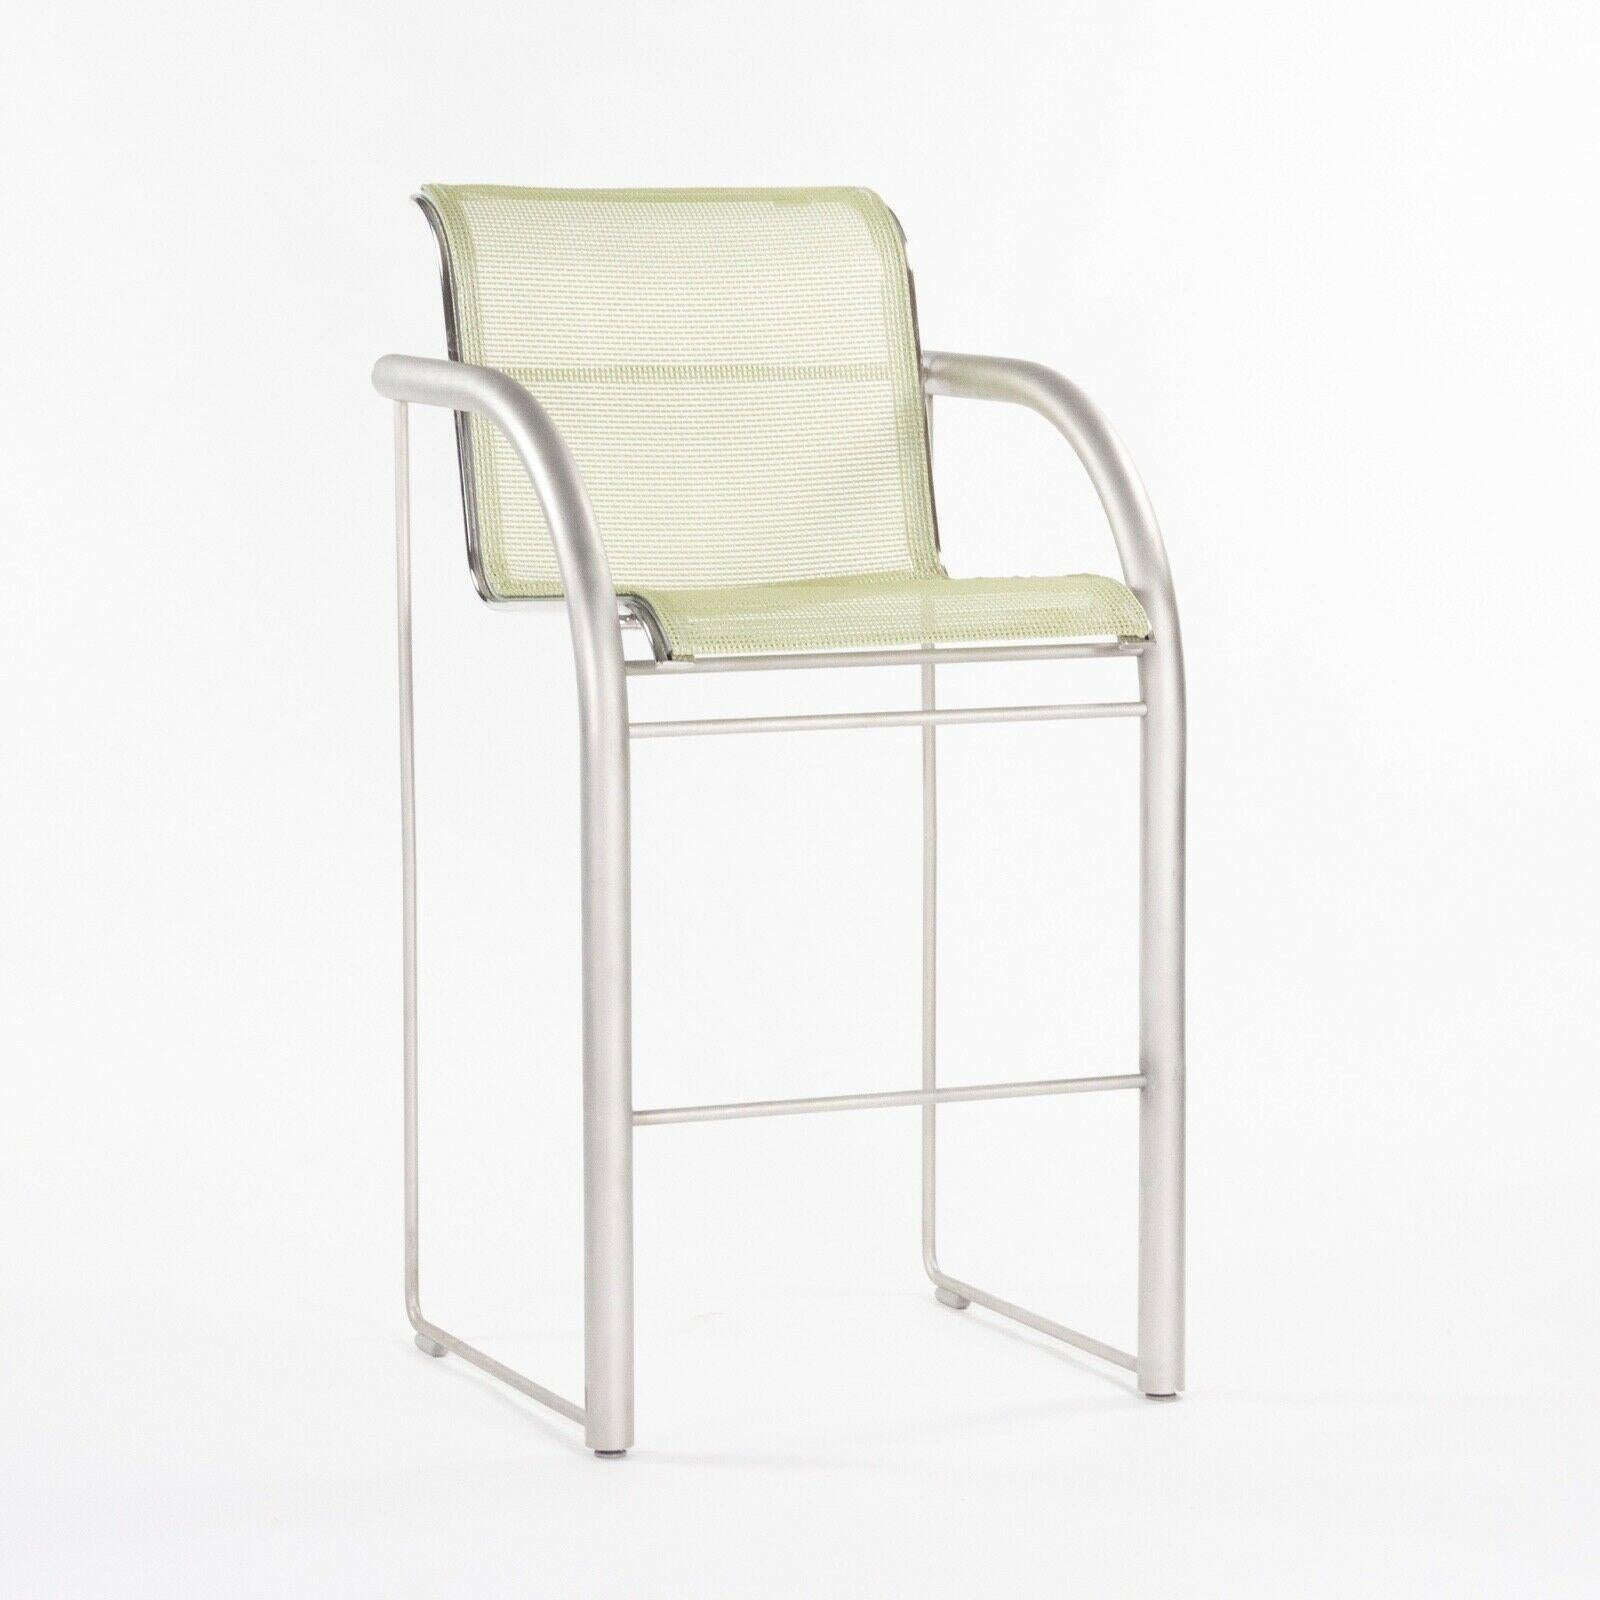 Modern Prototype Richard Schultz 2002 Collection Stainless Bar Stool with Outdoor Mesh